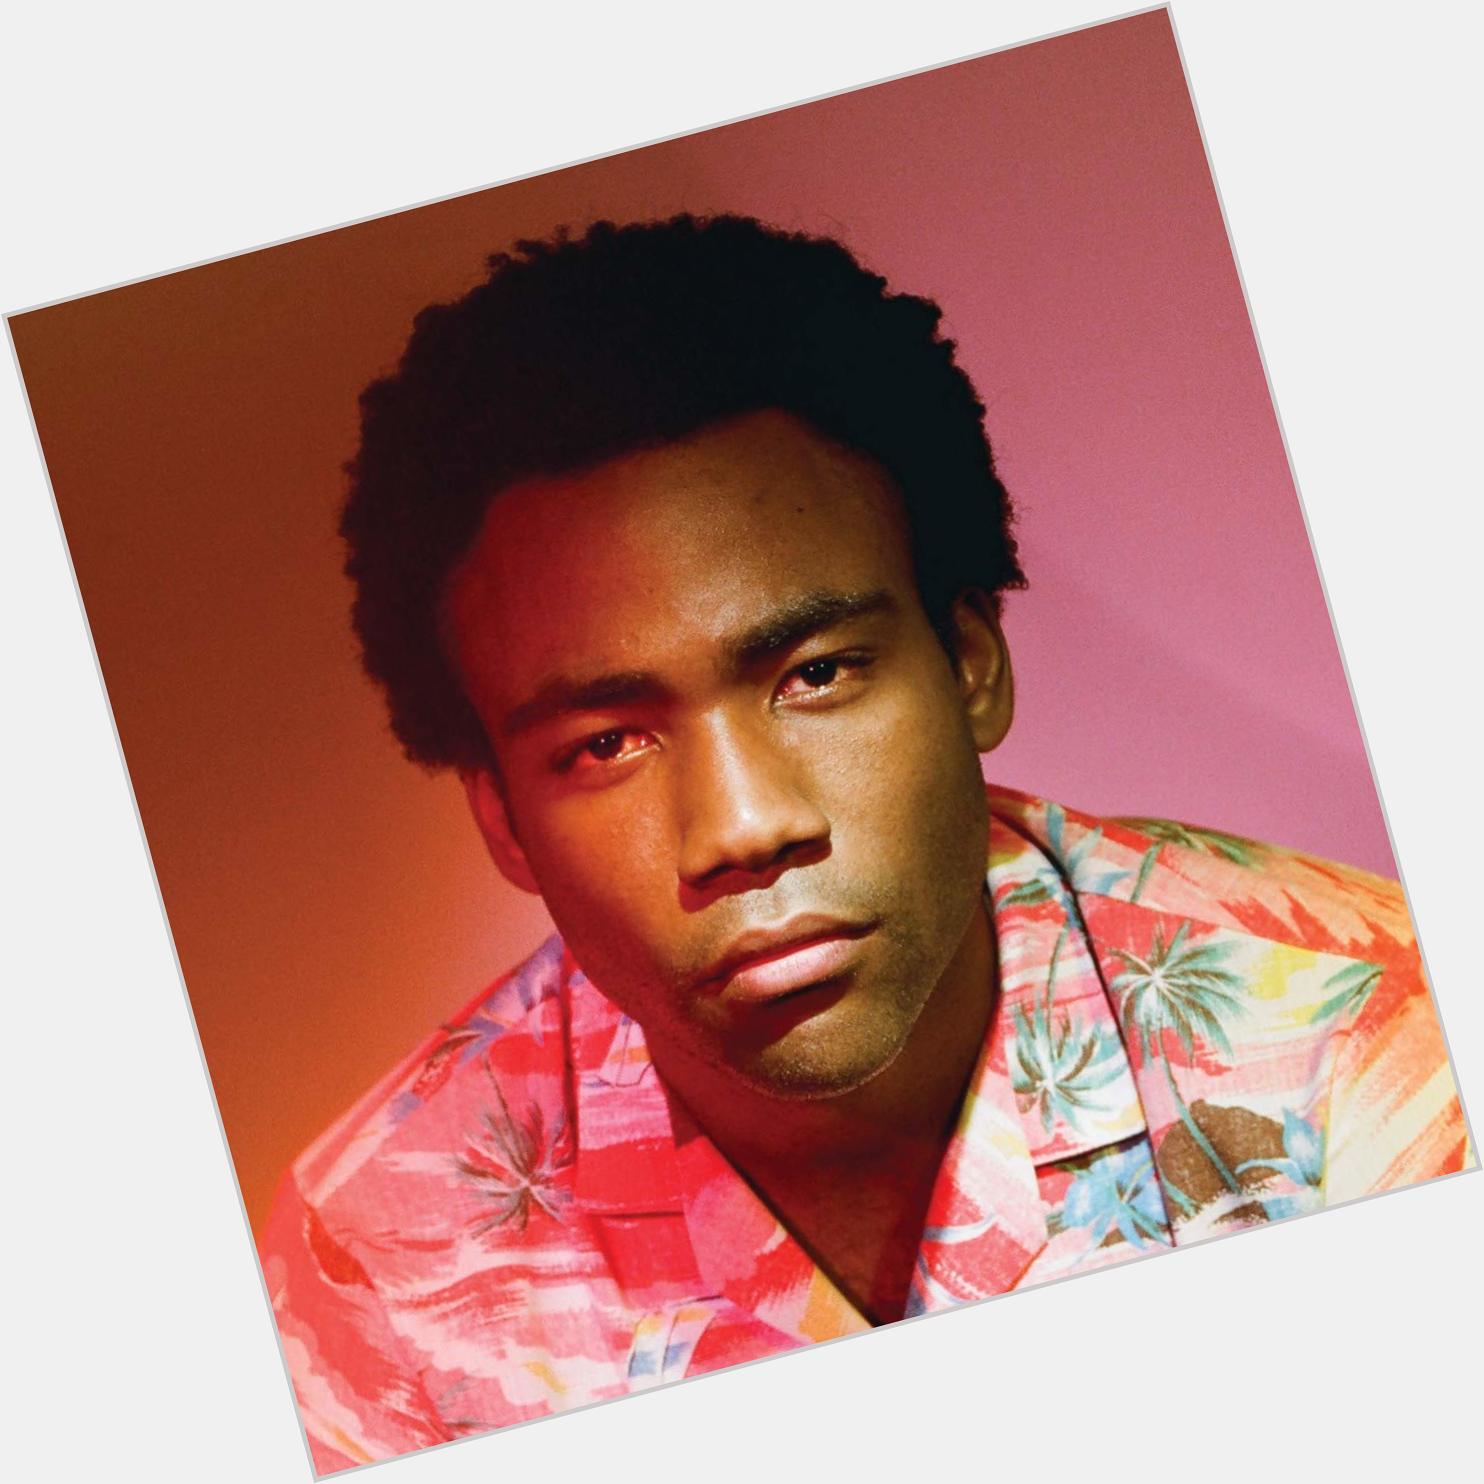 Happy birthday to Donald Glover!!! Thank you for all of the amazing art you\ve given to us. 